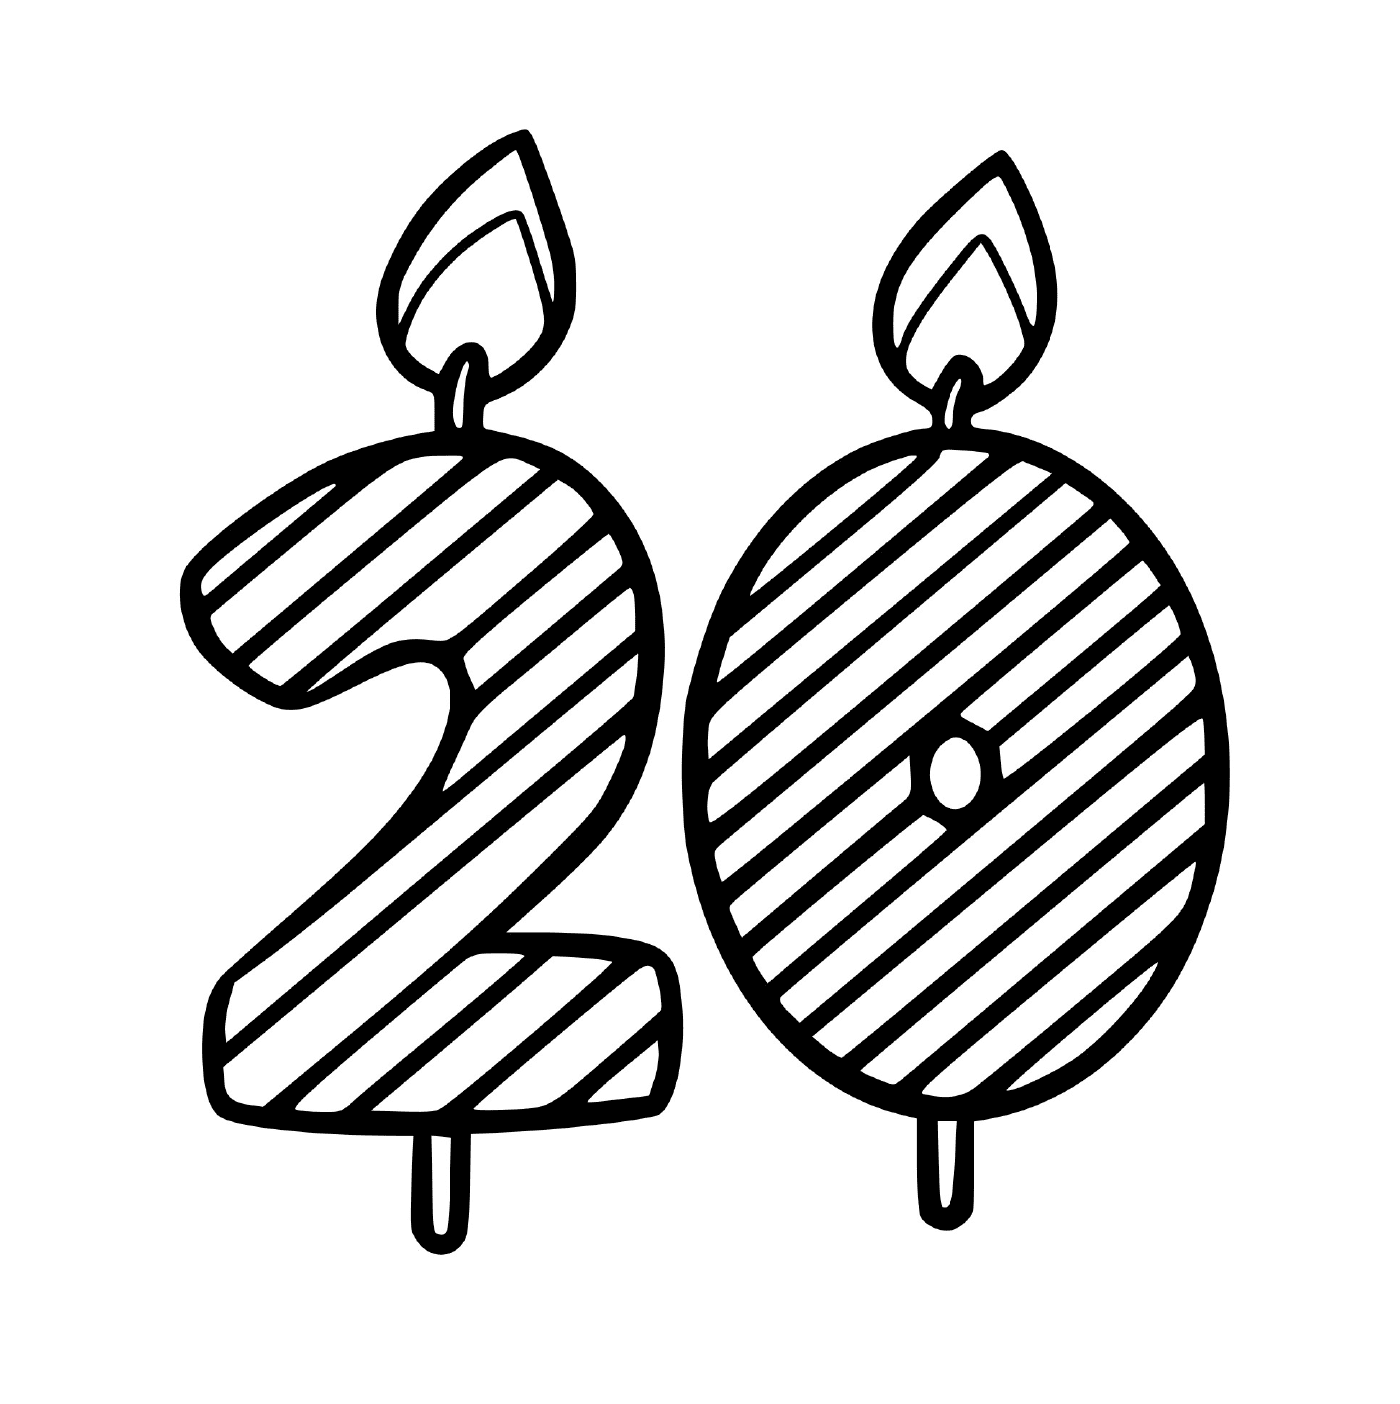  A candle with the number 2 0 